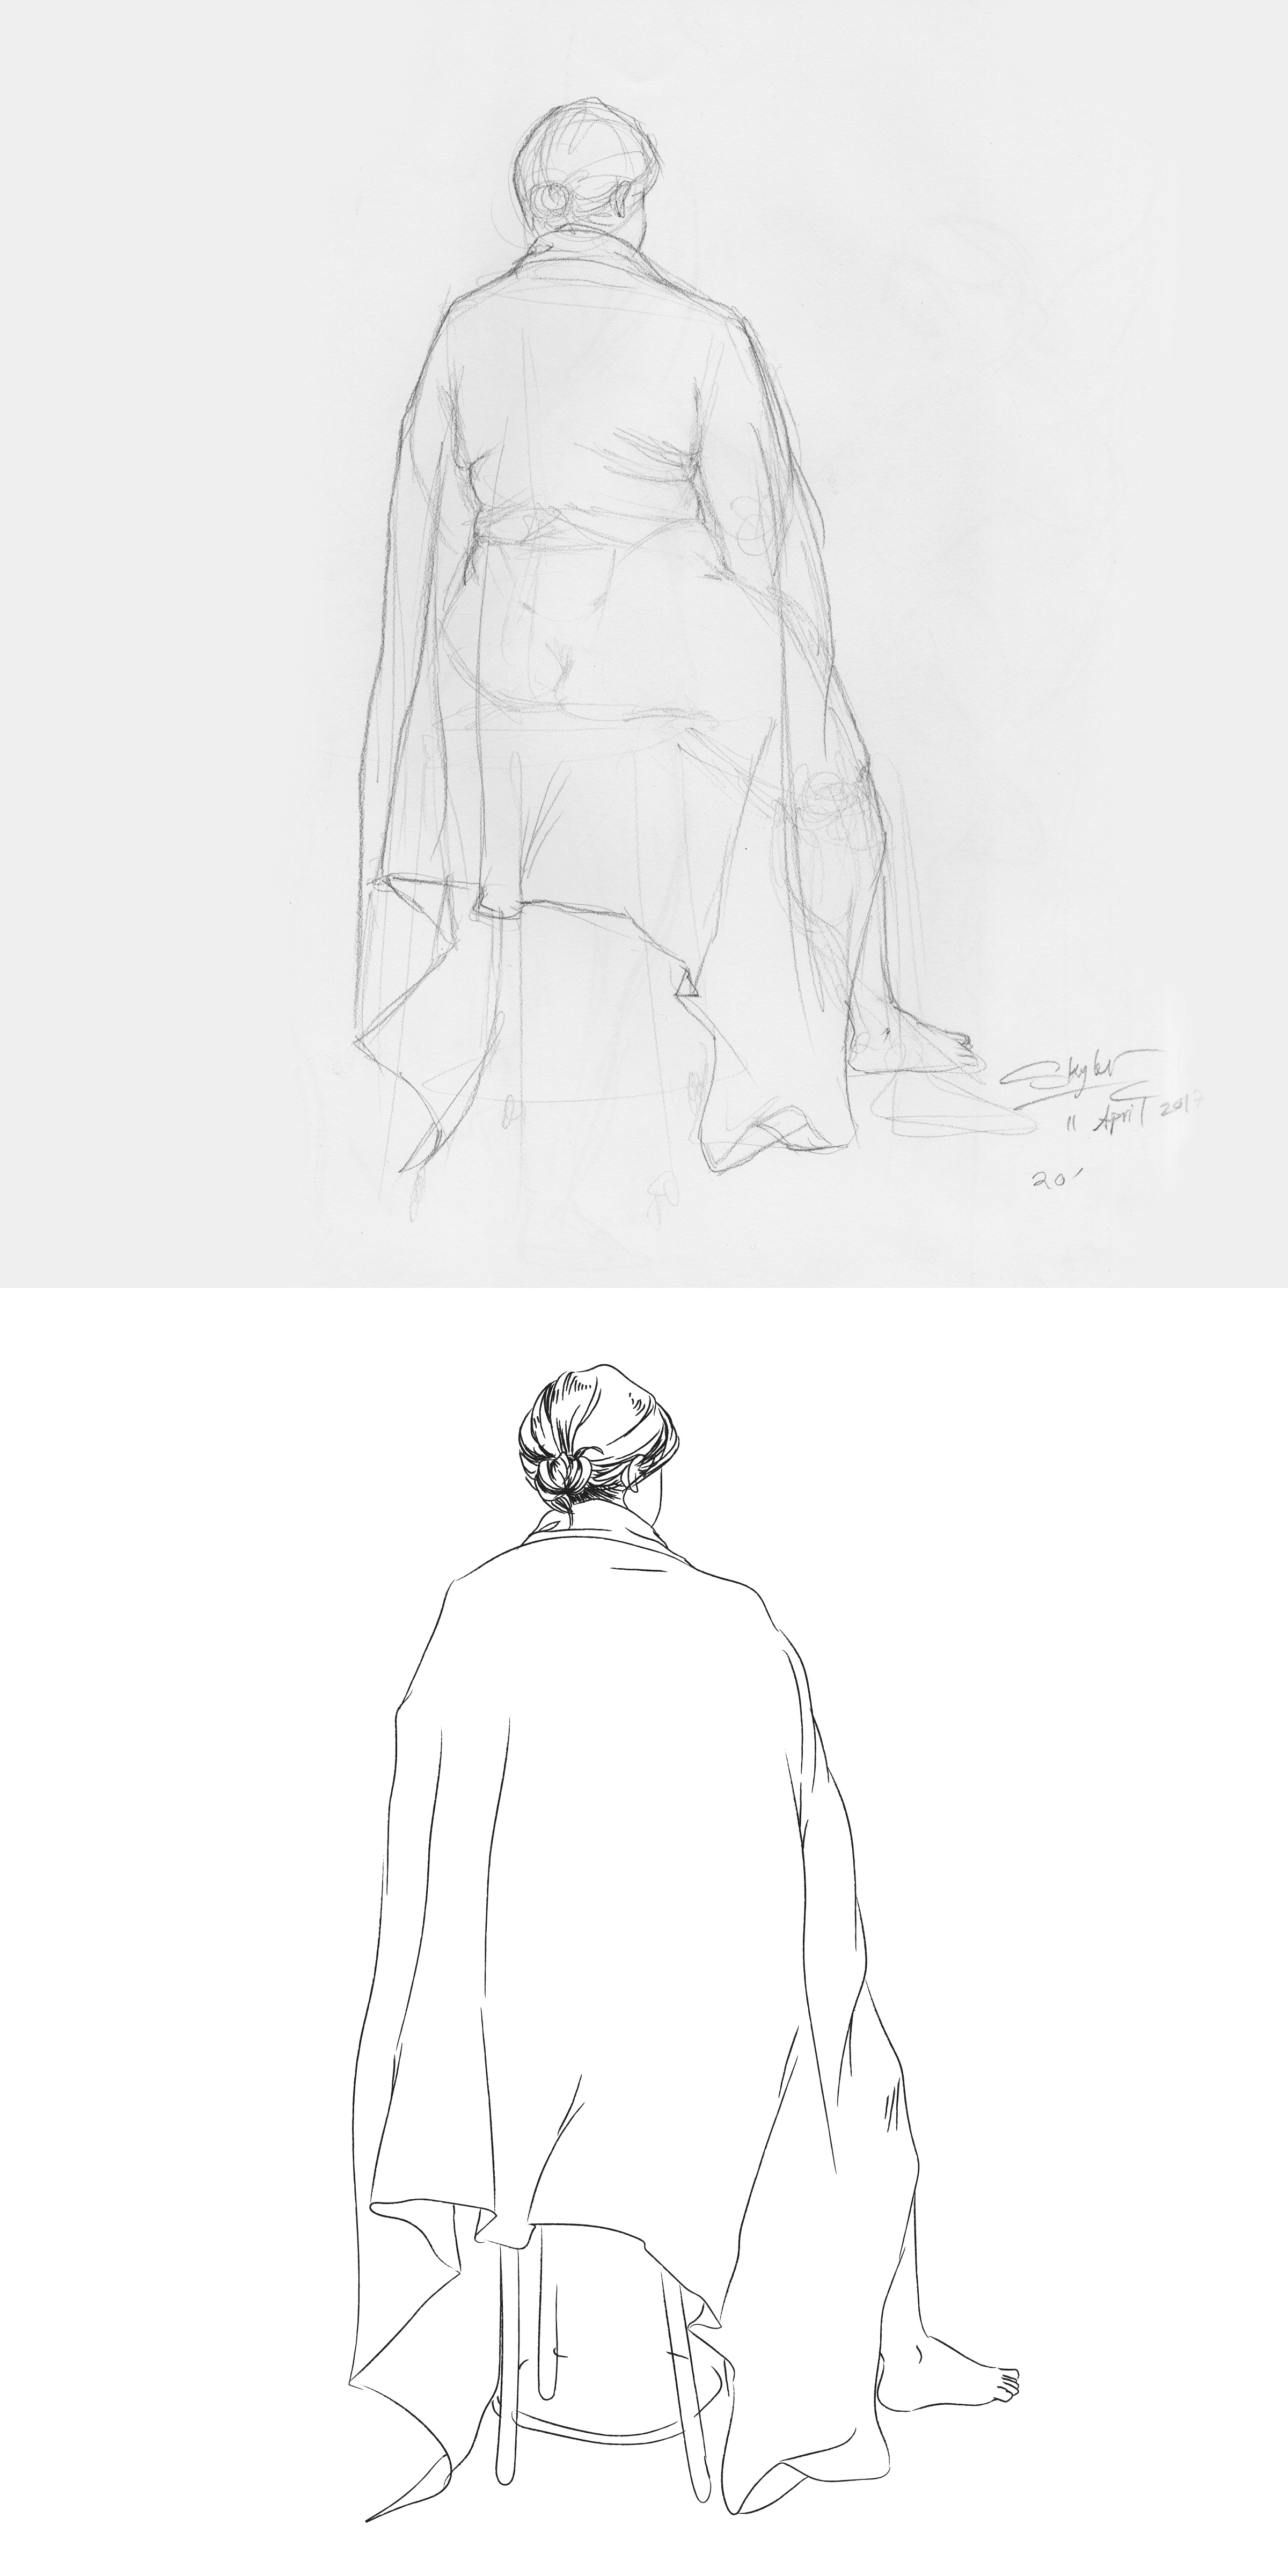 Garment Study: Charcoal, Graphite, and Adobe Illustrator CC | Drawing & Imaging